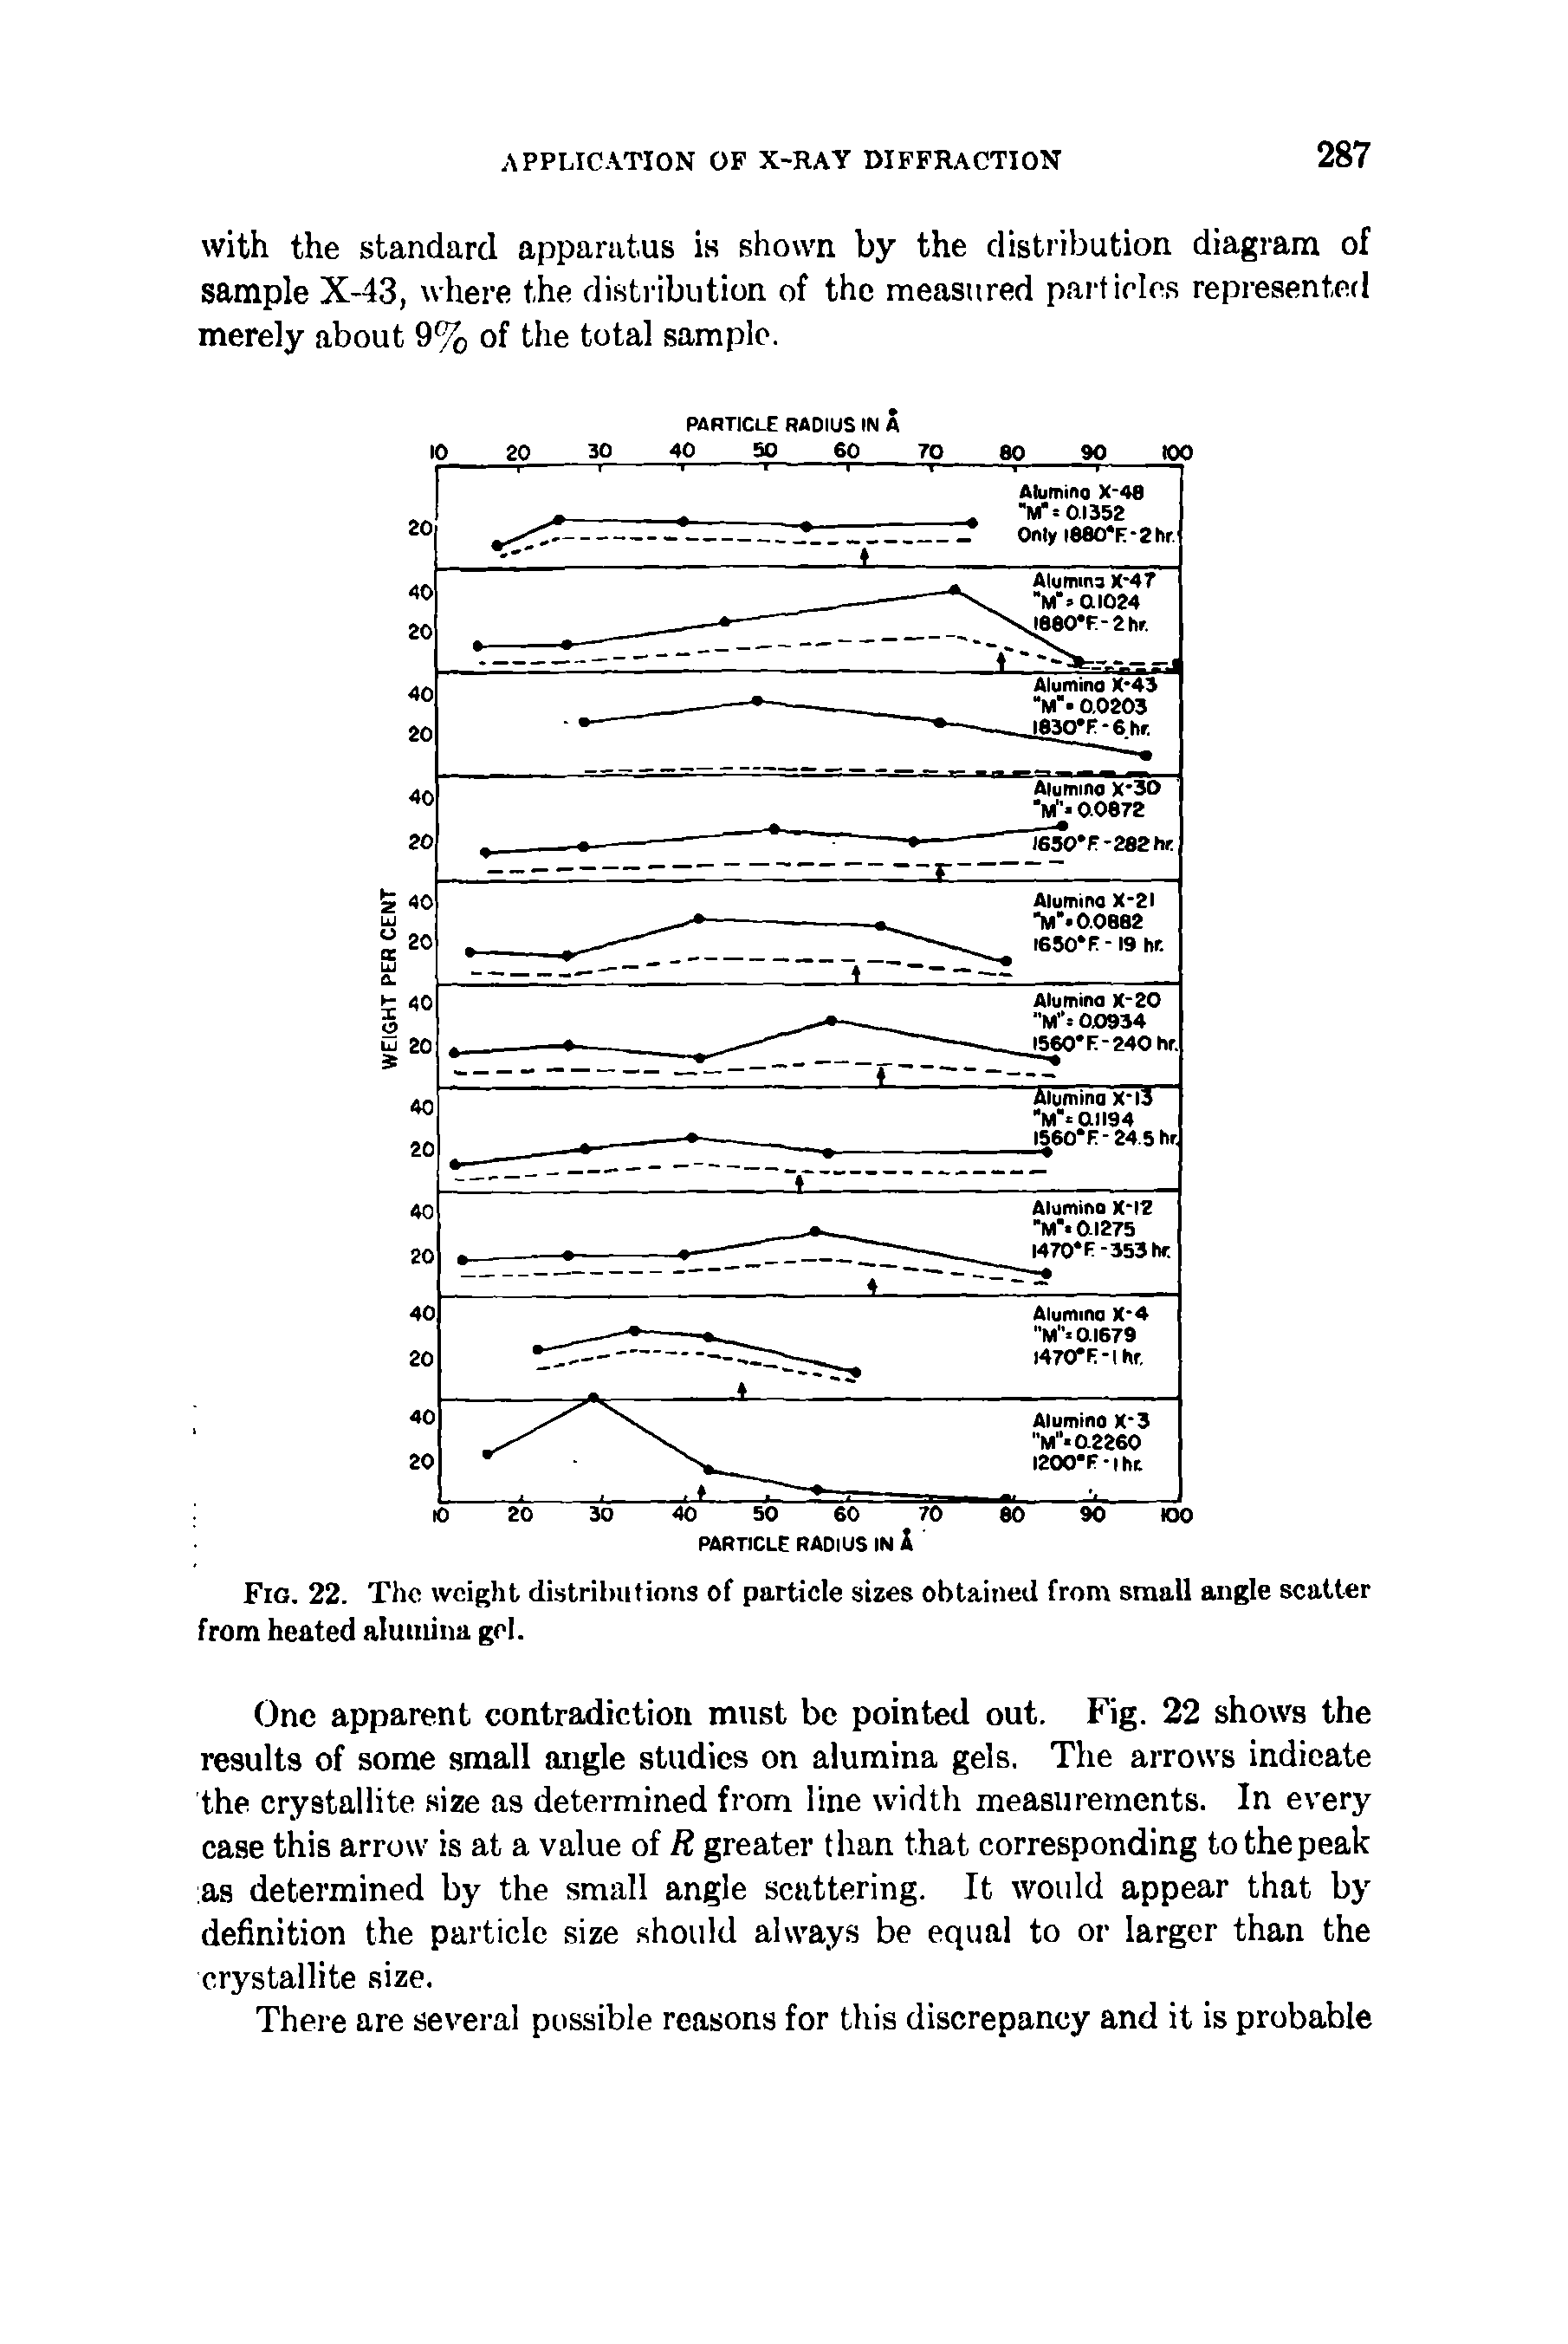 Fig. 22. The weight distributions of particle sizes obtained from small angle scatter from heated alumina gel.